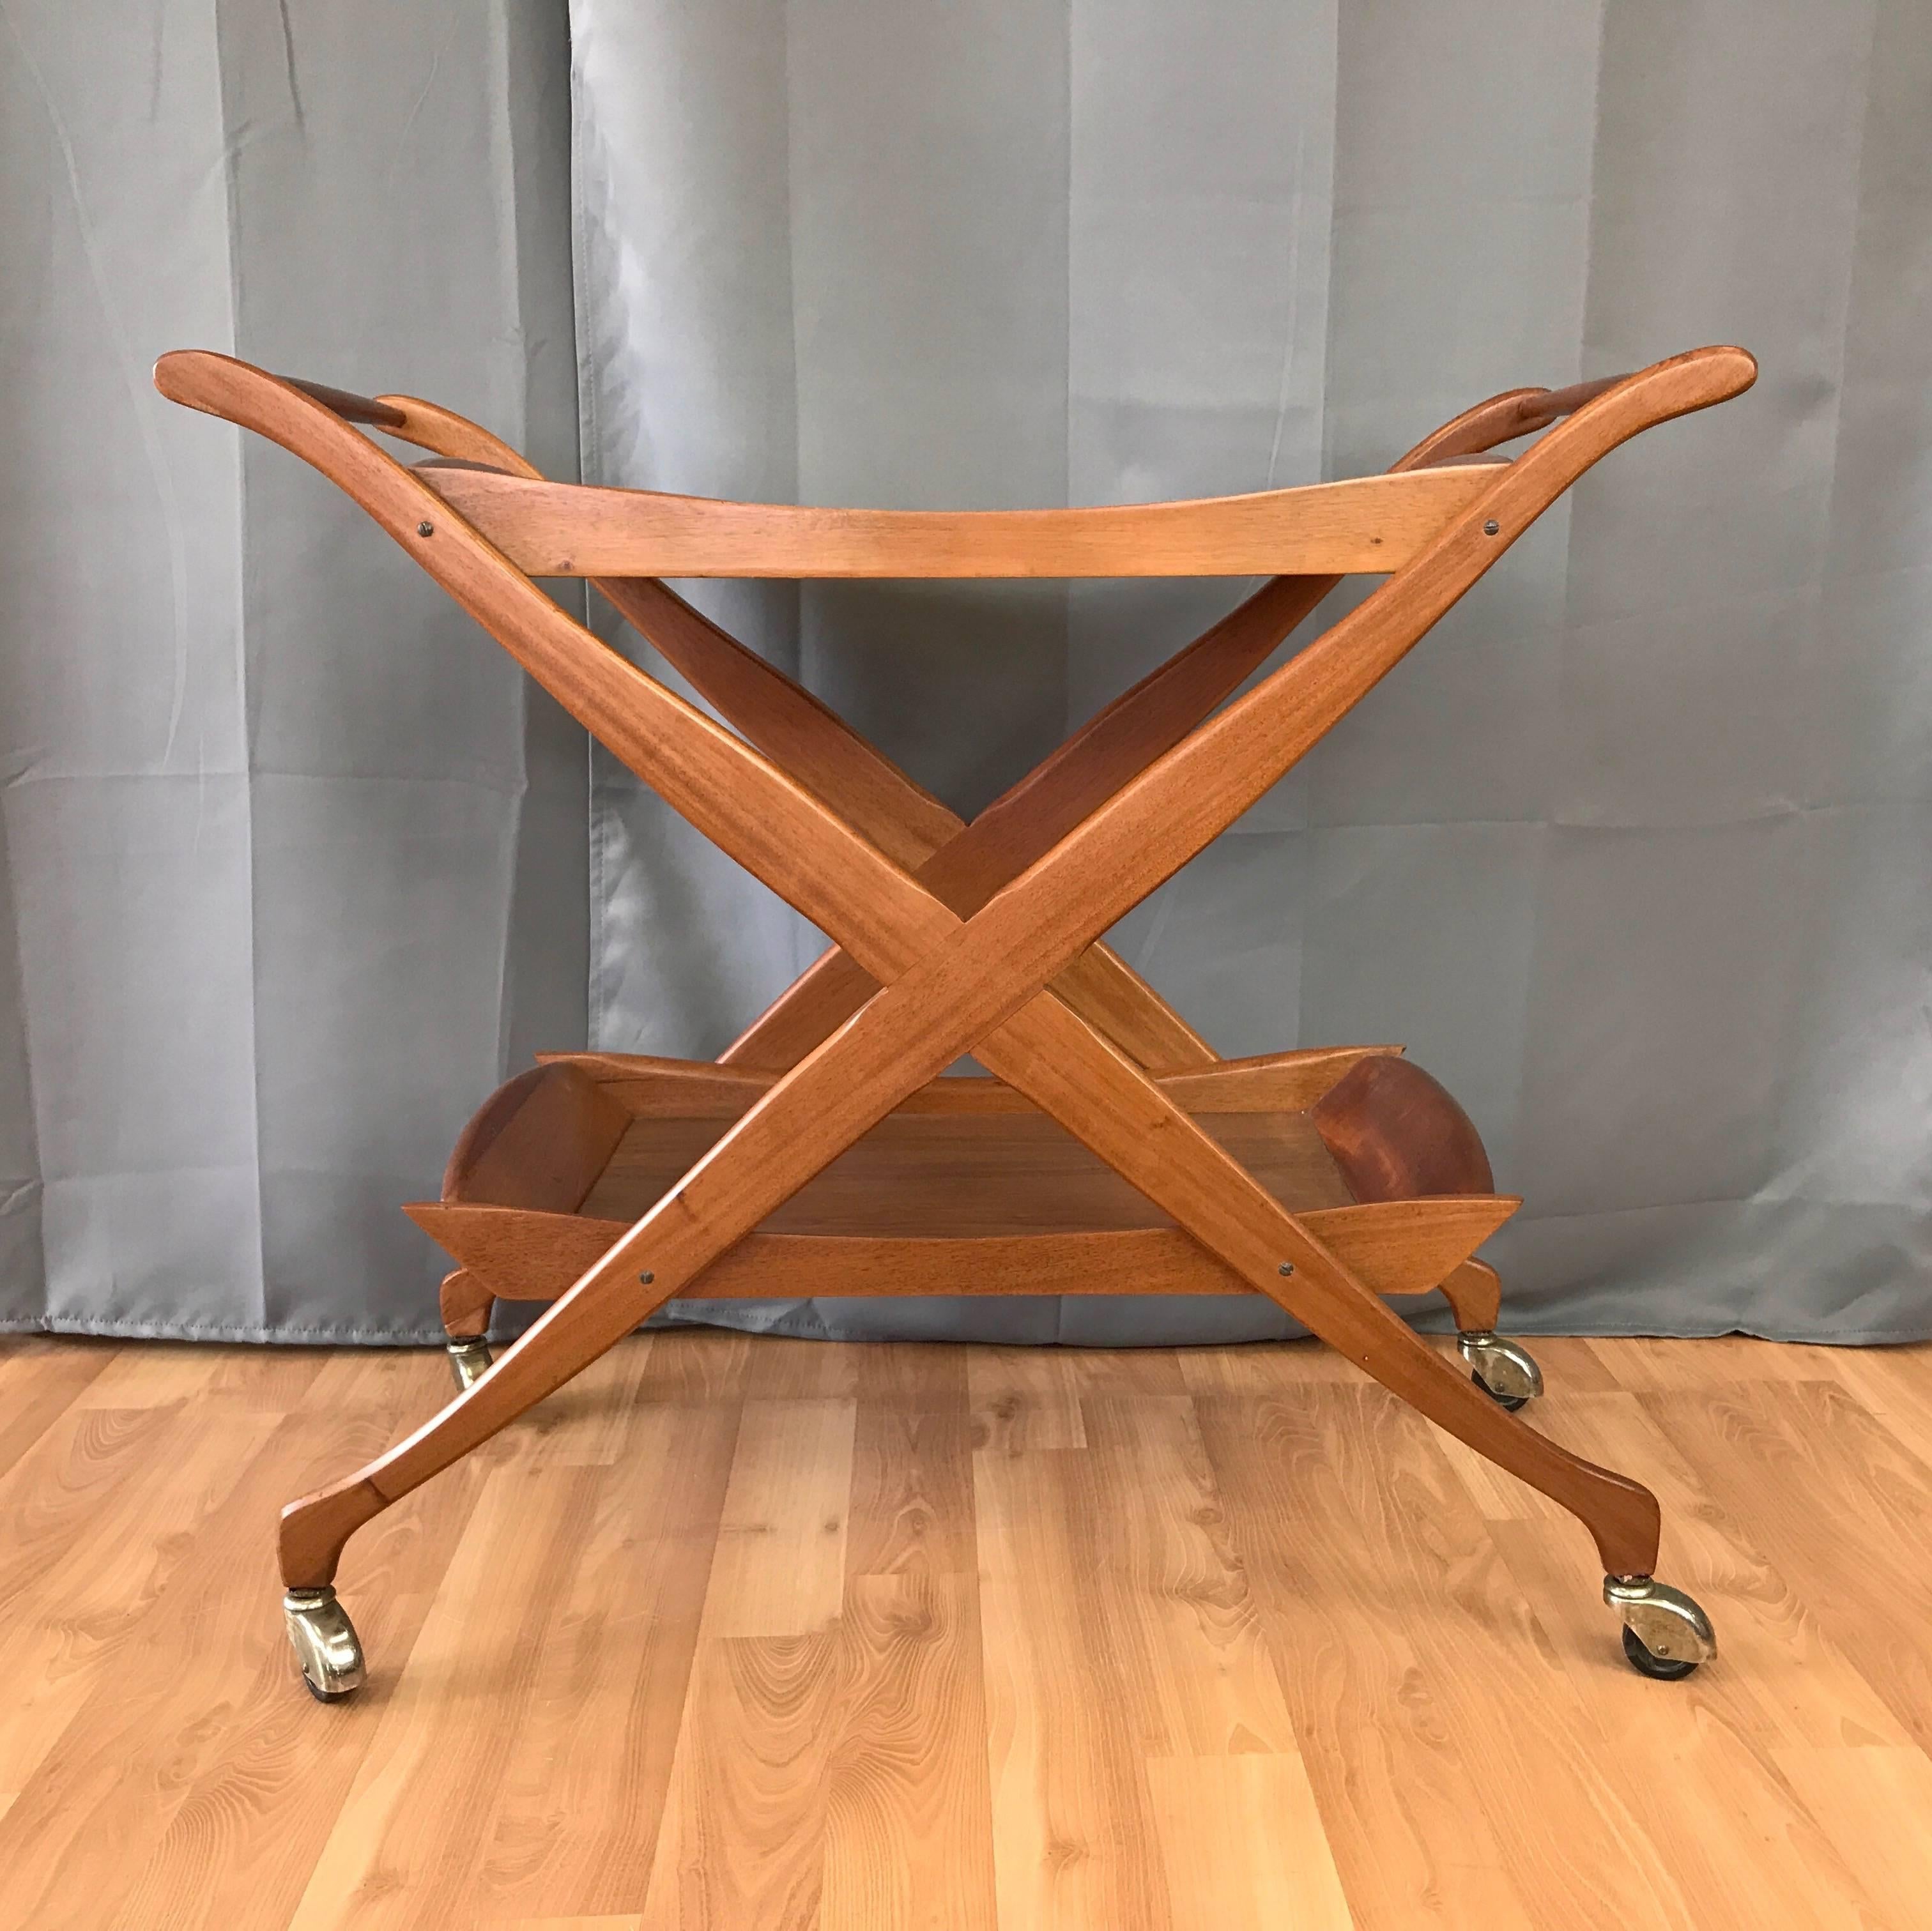 A vintage walnut serving, bar, or tea cart with two tiers and X-shaped legs.

Scissor-style solid walnut sides have very graceful lines that are echoed by the solid walnut frames of each tray-like tier. Solid walnut tapered dowel handles. Serving